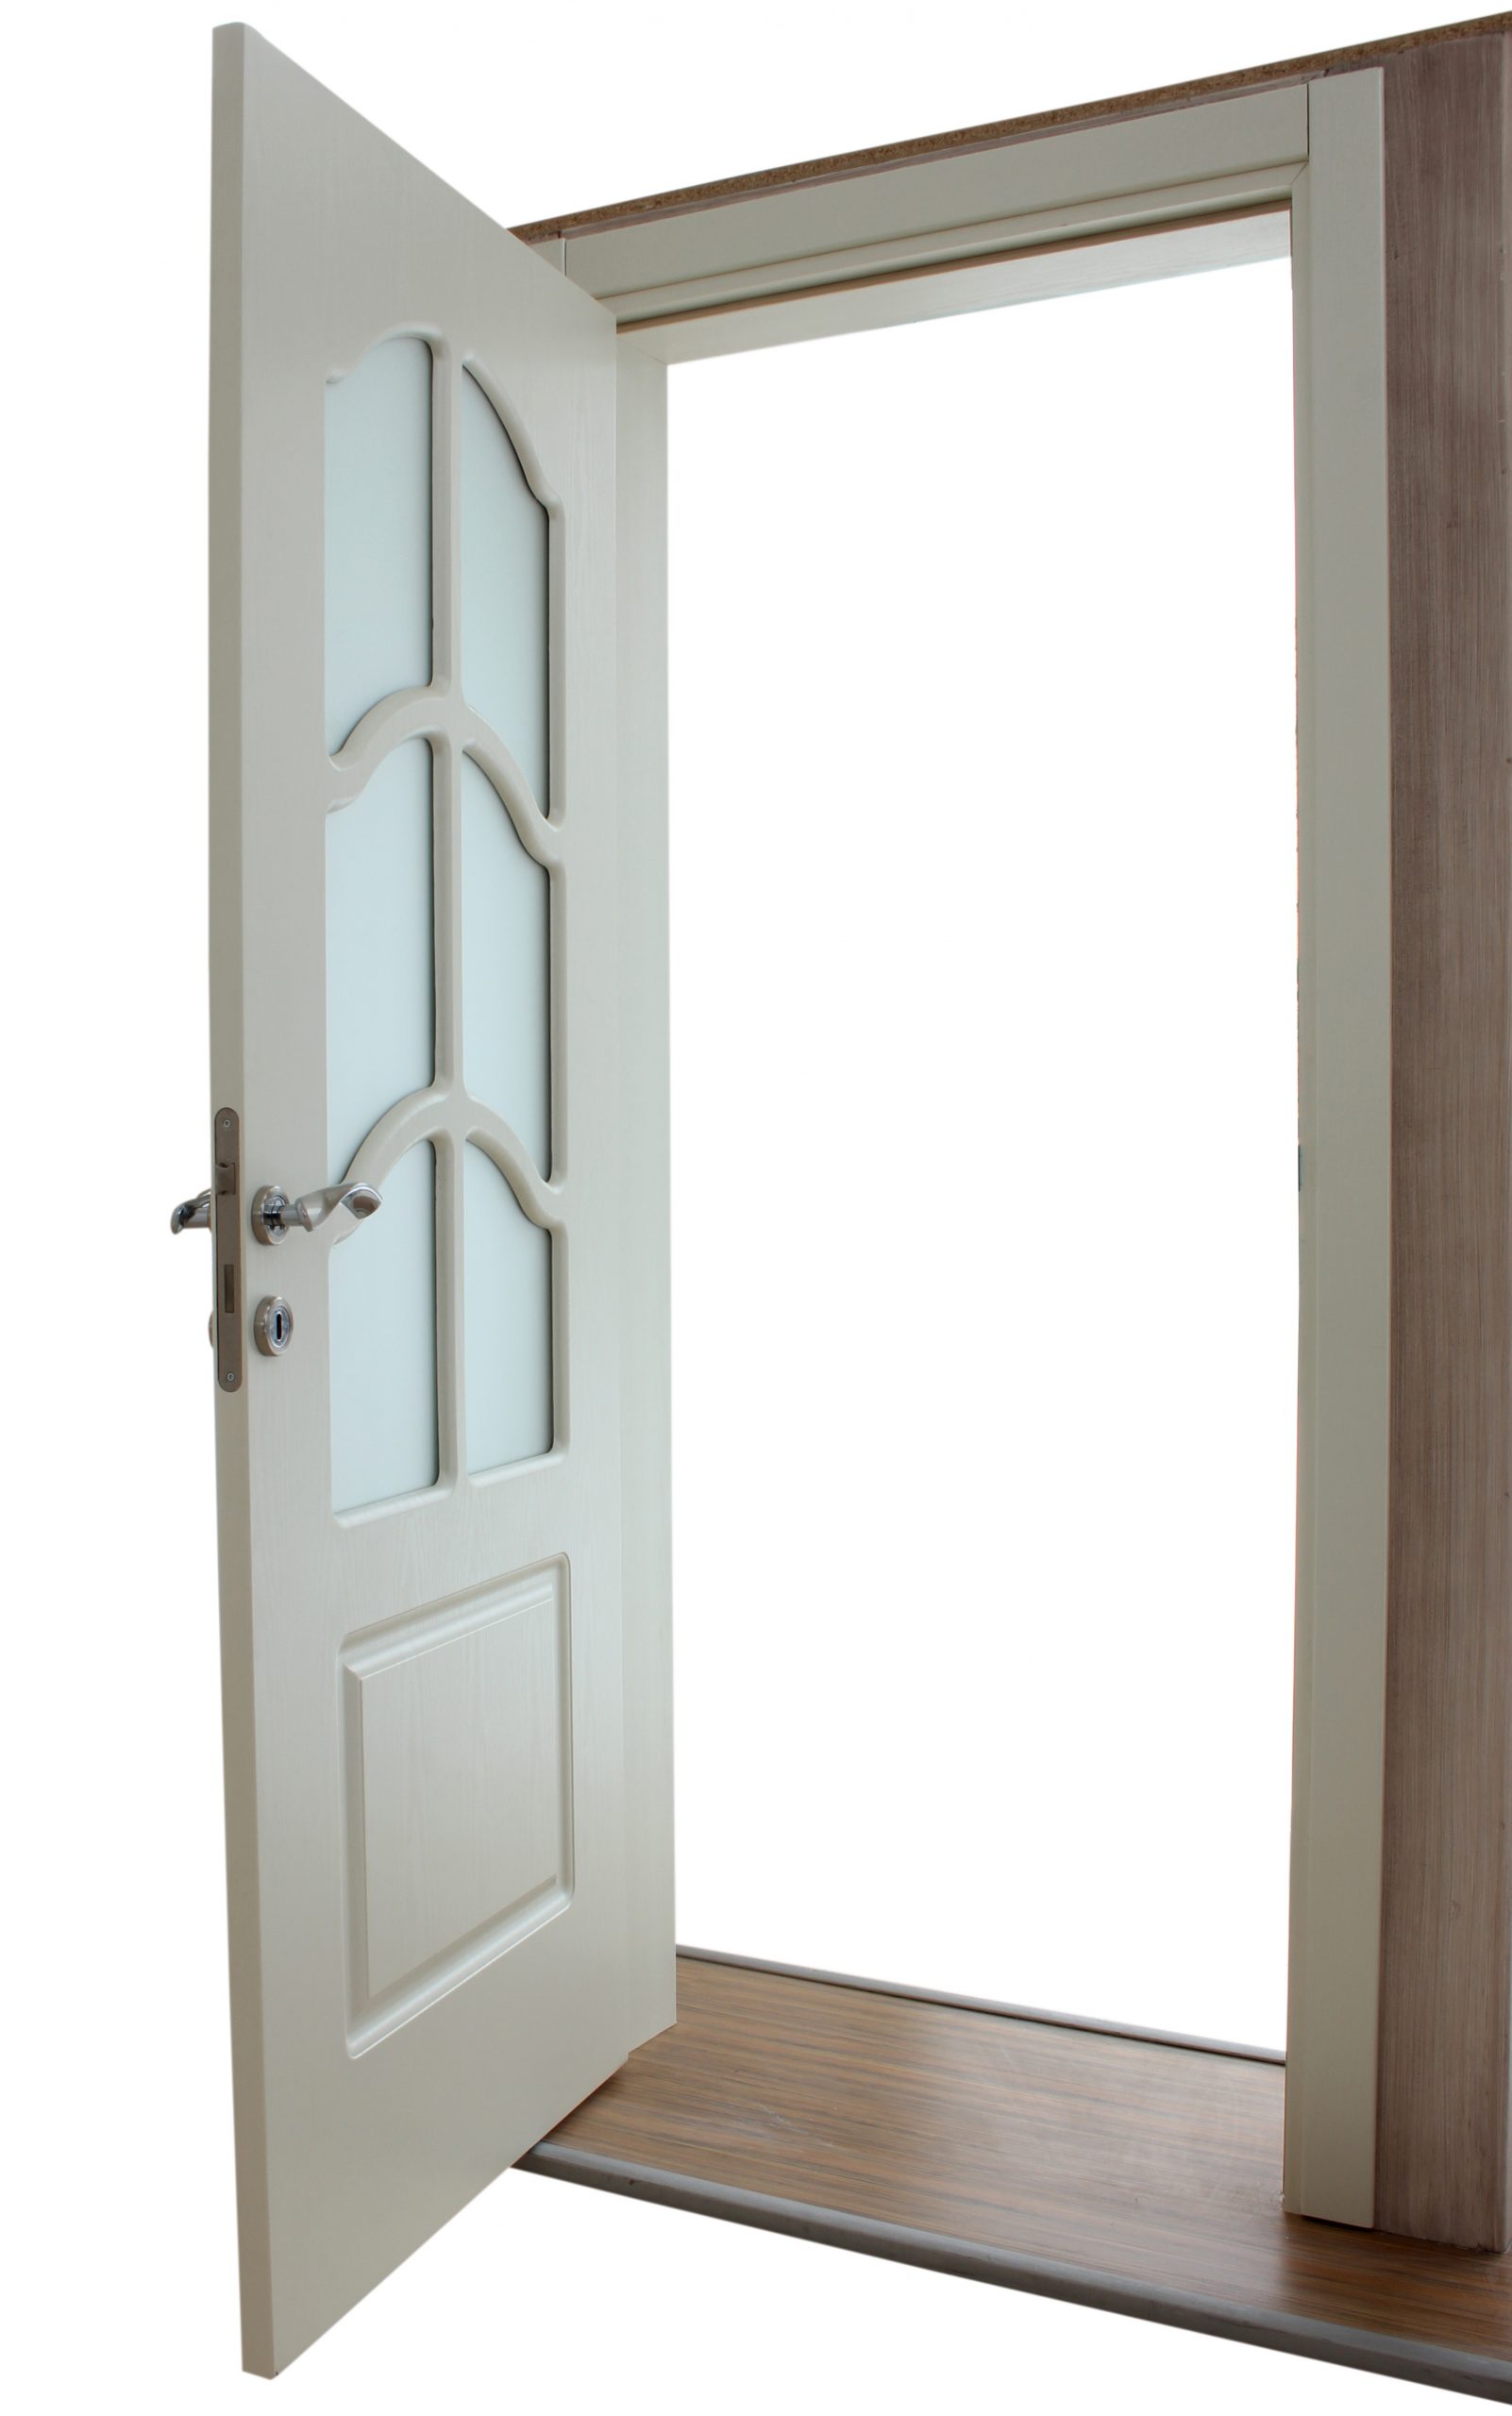 What to Look for When Buying Residential Exterior Doors in Greenwich